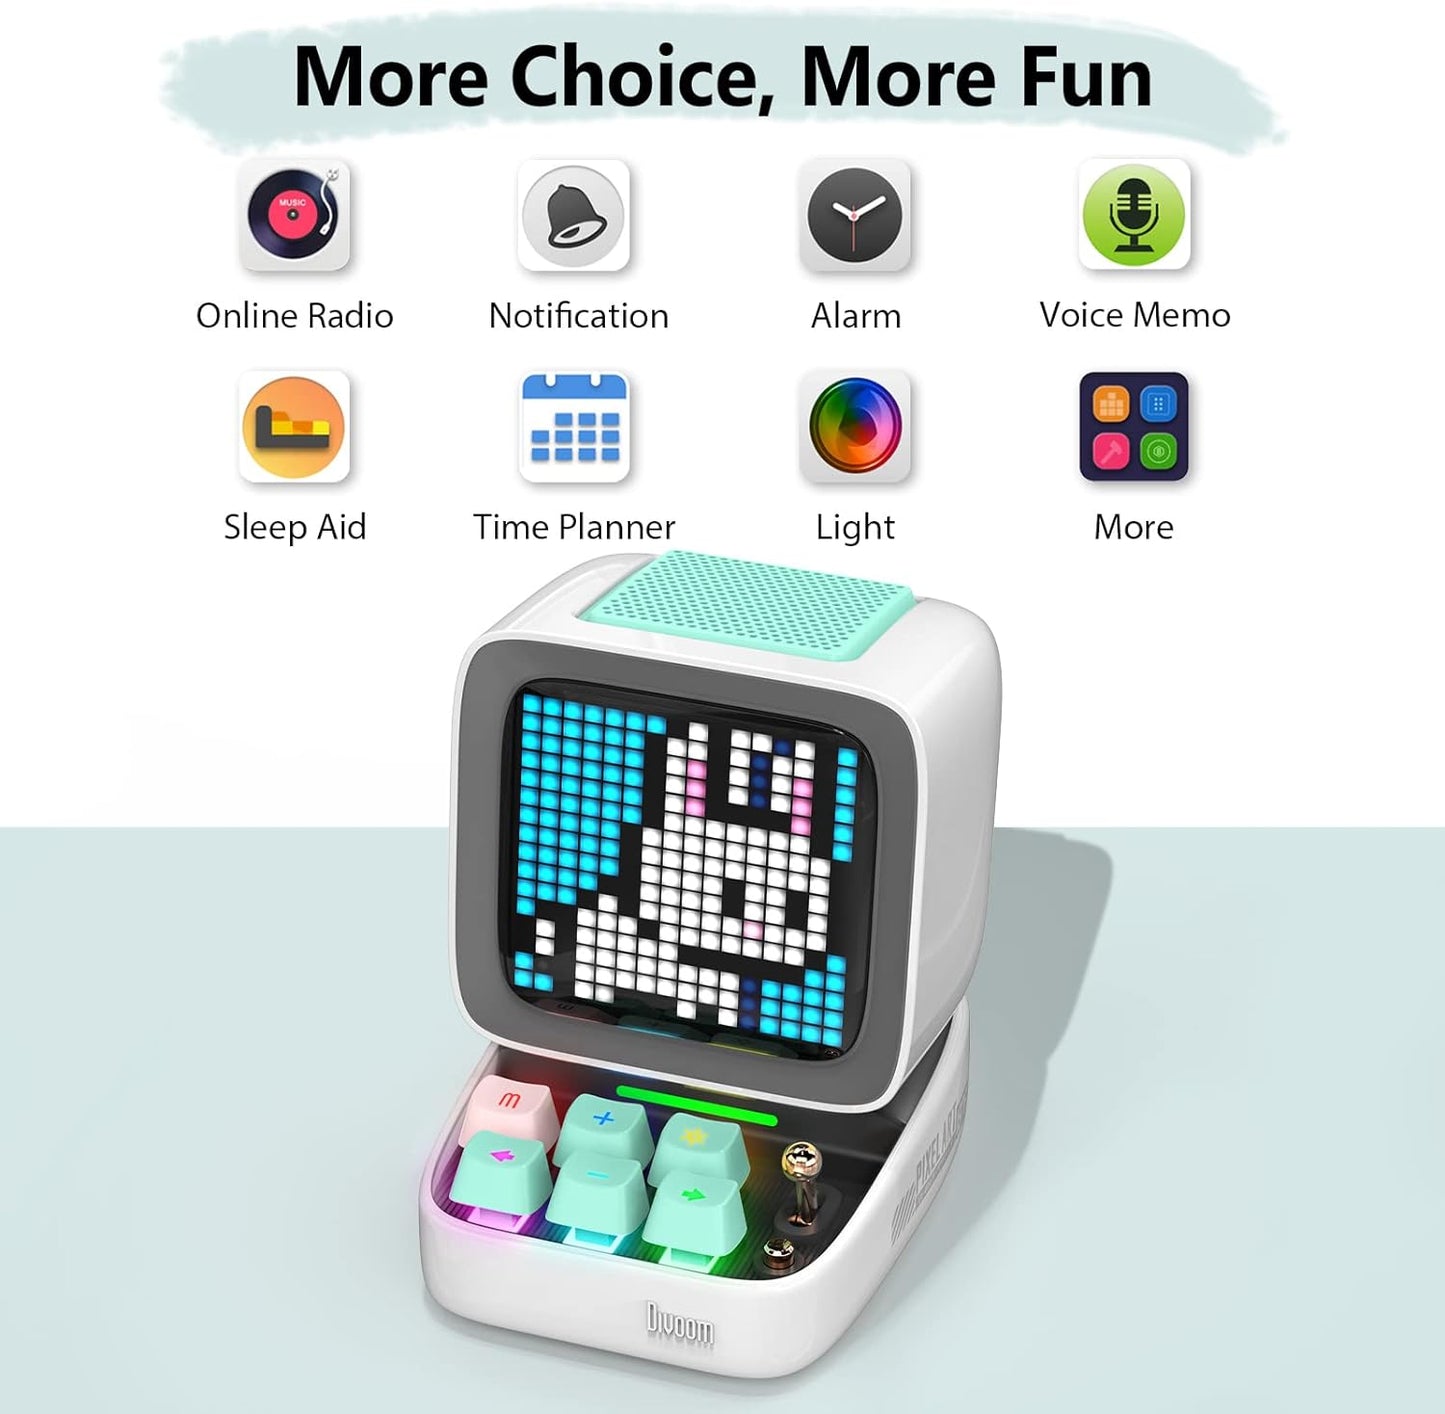 DIVOOM DITOO-PRO RETRO PIXEL ART GAMING PORTABLE BLUETOOTH SPEAKER WITH APP CONTROLLED 16X16 LED FRONT PANEL, ALSO A SMART ALARM (WHITE)